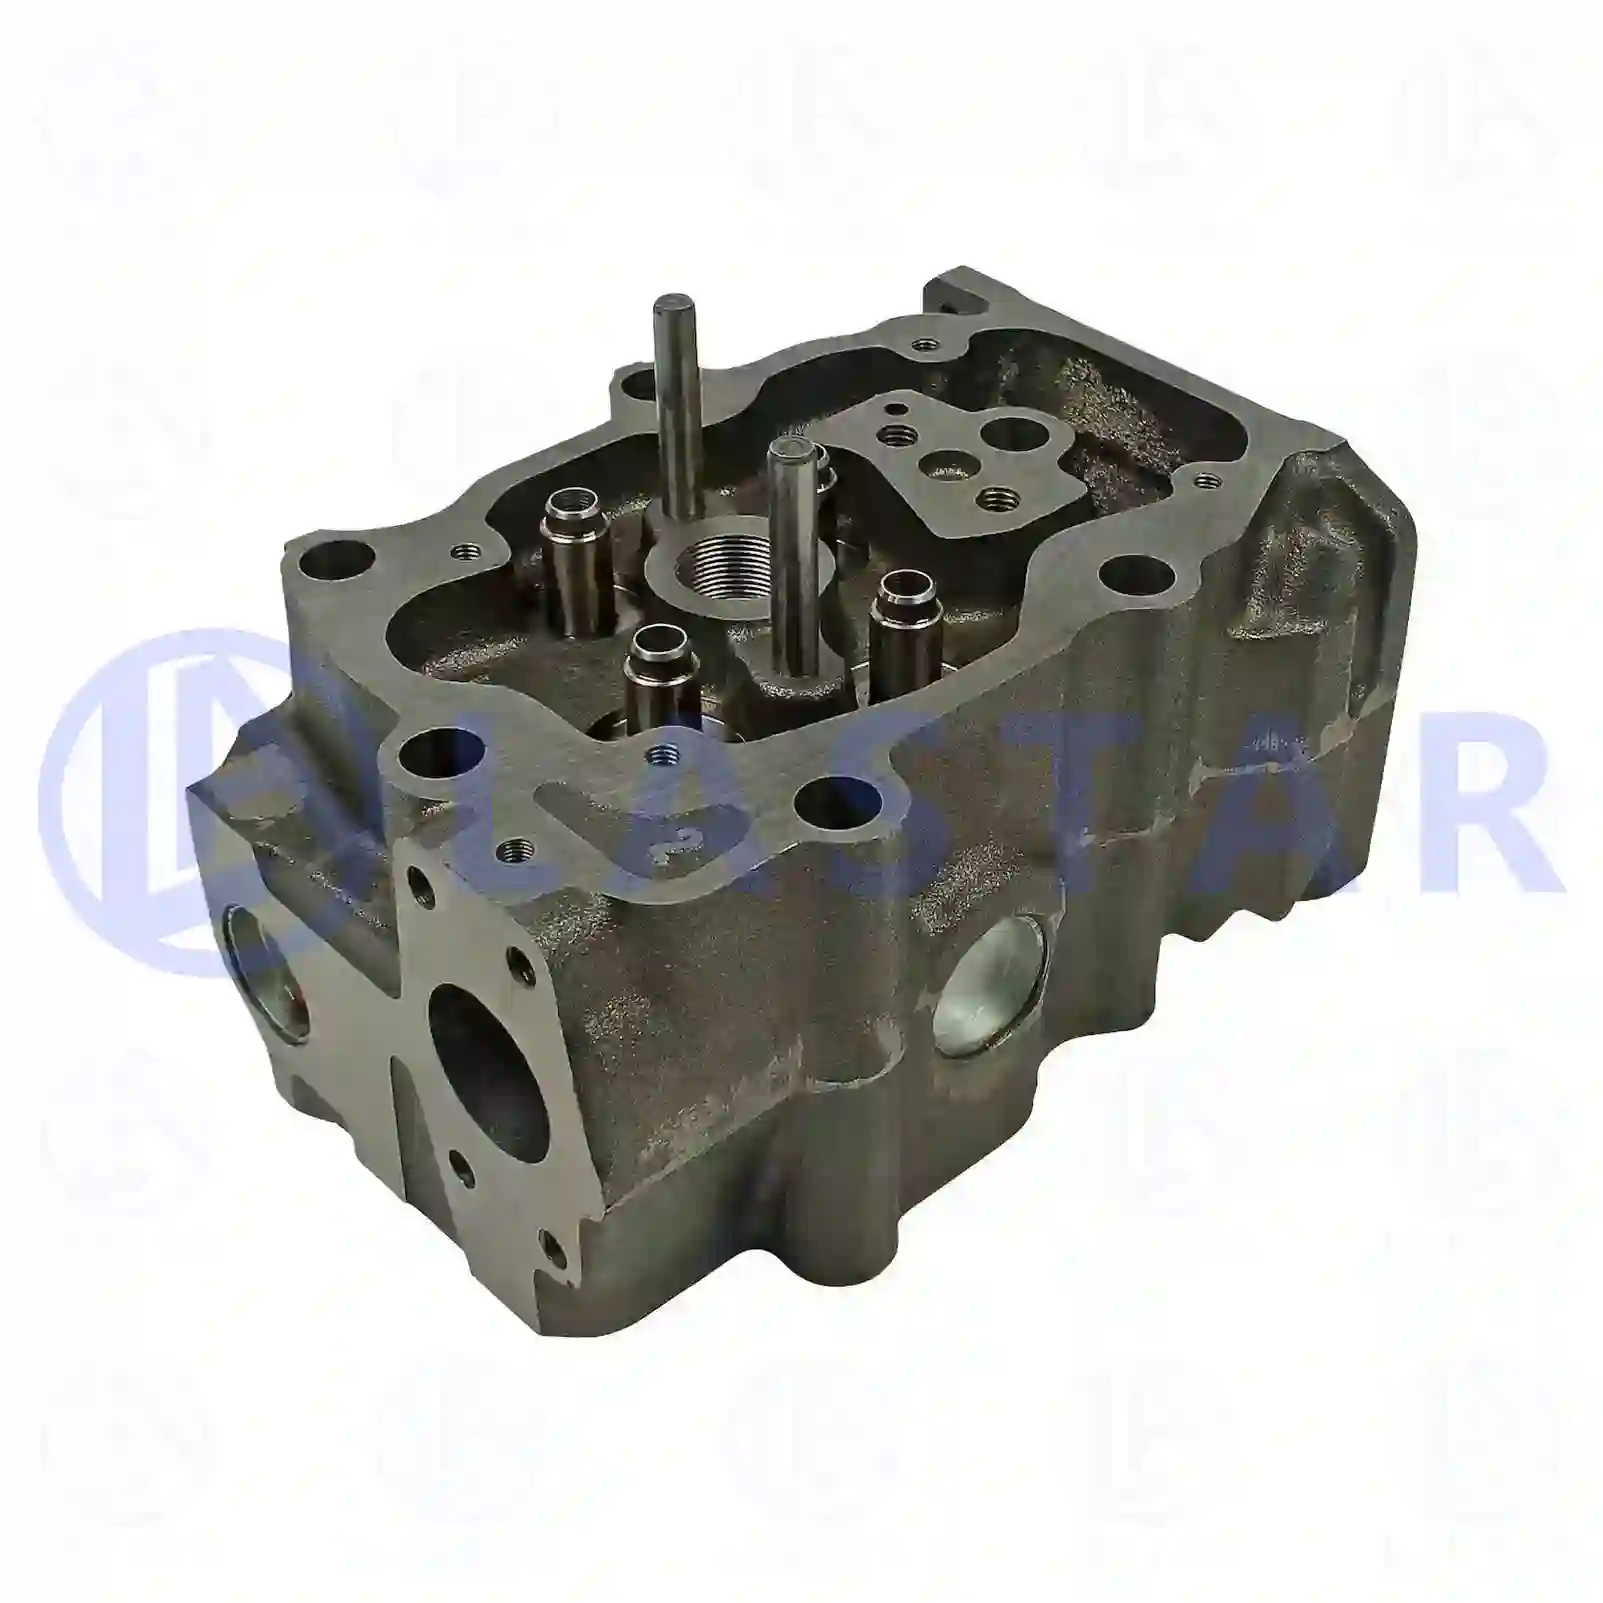 Cylinder head, without valves, 77704824, 10570074, 1448285, 1450060, 1570074, 1846591, 570074 ||  77704824 Lastar Spare Part | Truck Spare Parts, Auotomotive Spare Parts Cylinder head, without valves, 77704824, 10570074, 1448285, 1450060, 1570074, 1846591, 570074 ||  77704824 Lastar Spare Part | Truck Spare Parts, Auotomotive Spare Parts